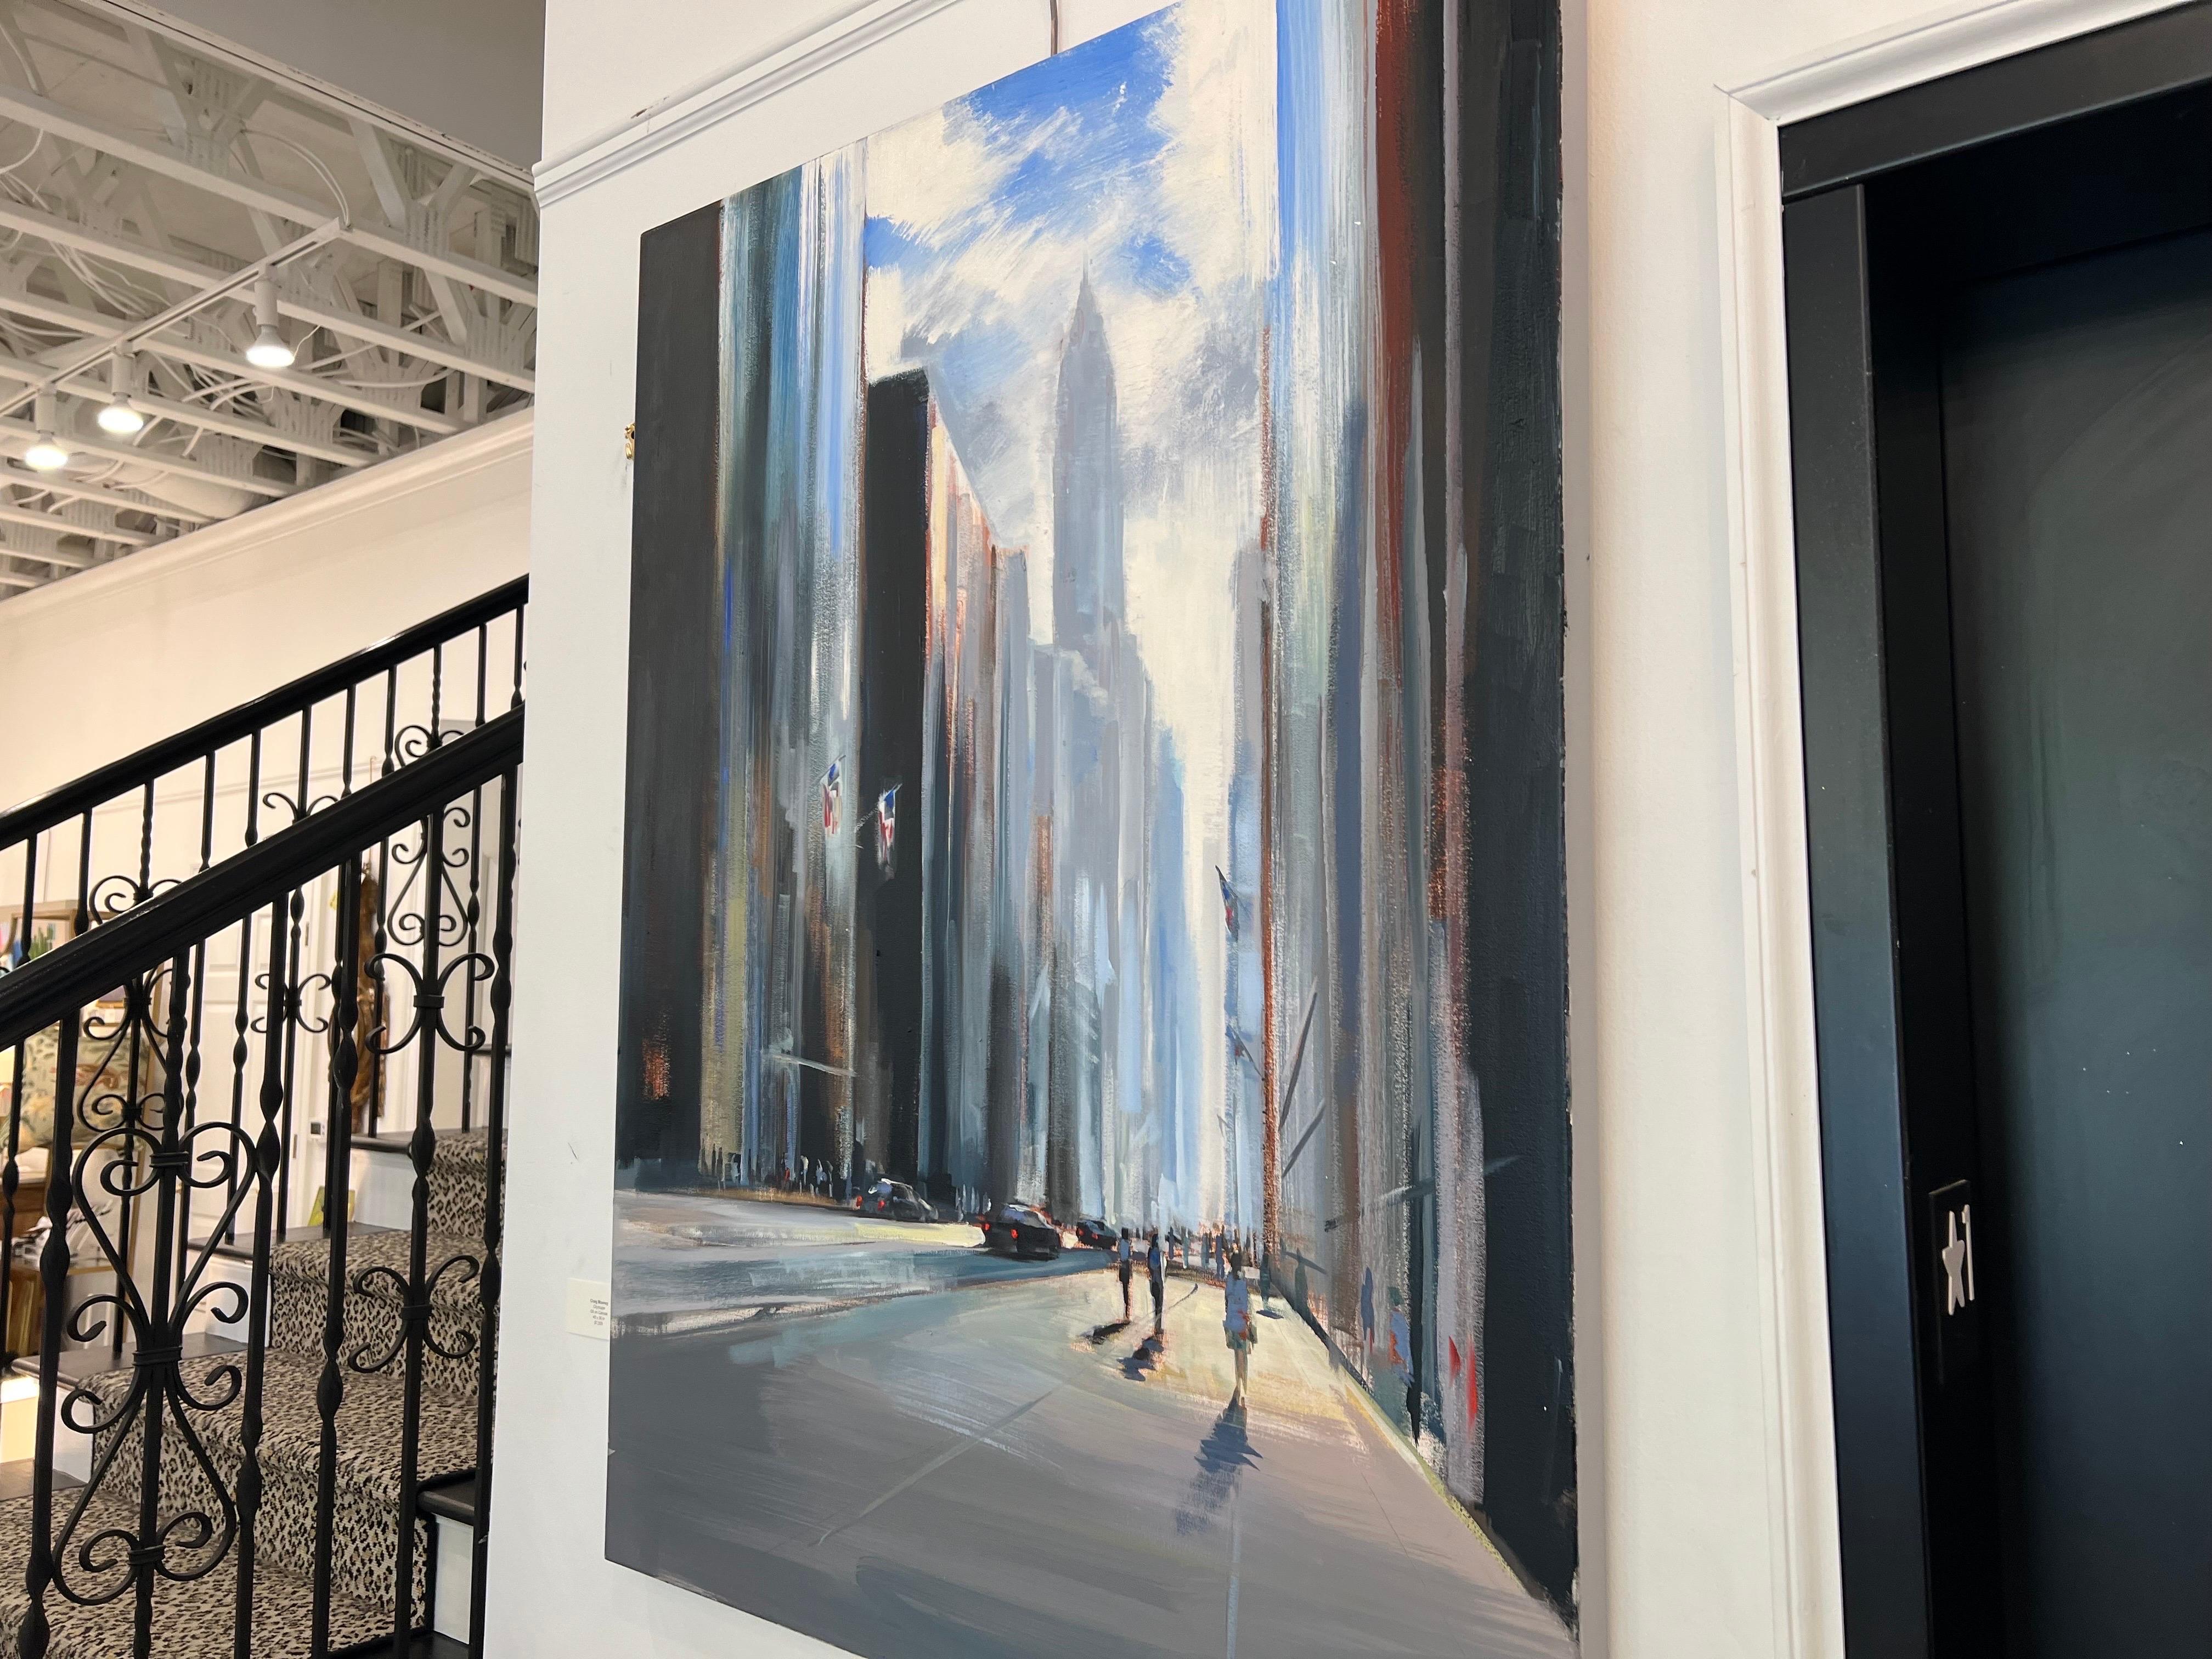 'Cityscape' is a large vertical representational oil on canvas painting of New York City created by American artist Craig Mooney in 2022. Featuring an exquisite palette mostly made of gray, blue and cream tones, accented with touches of red and